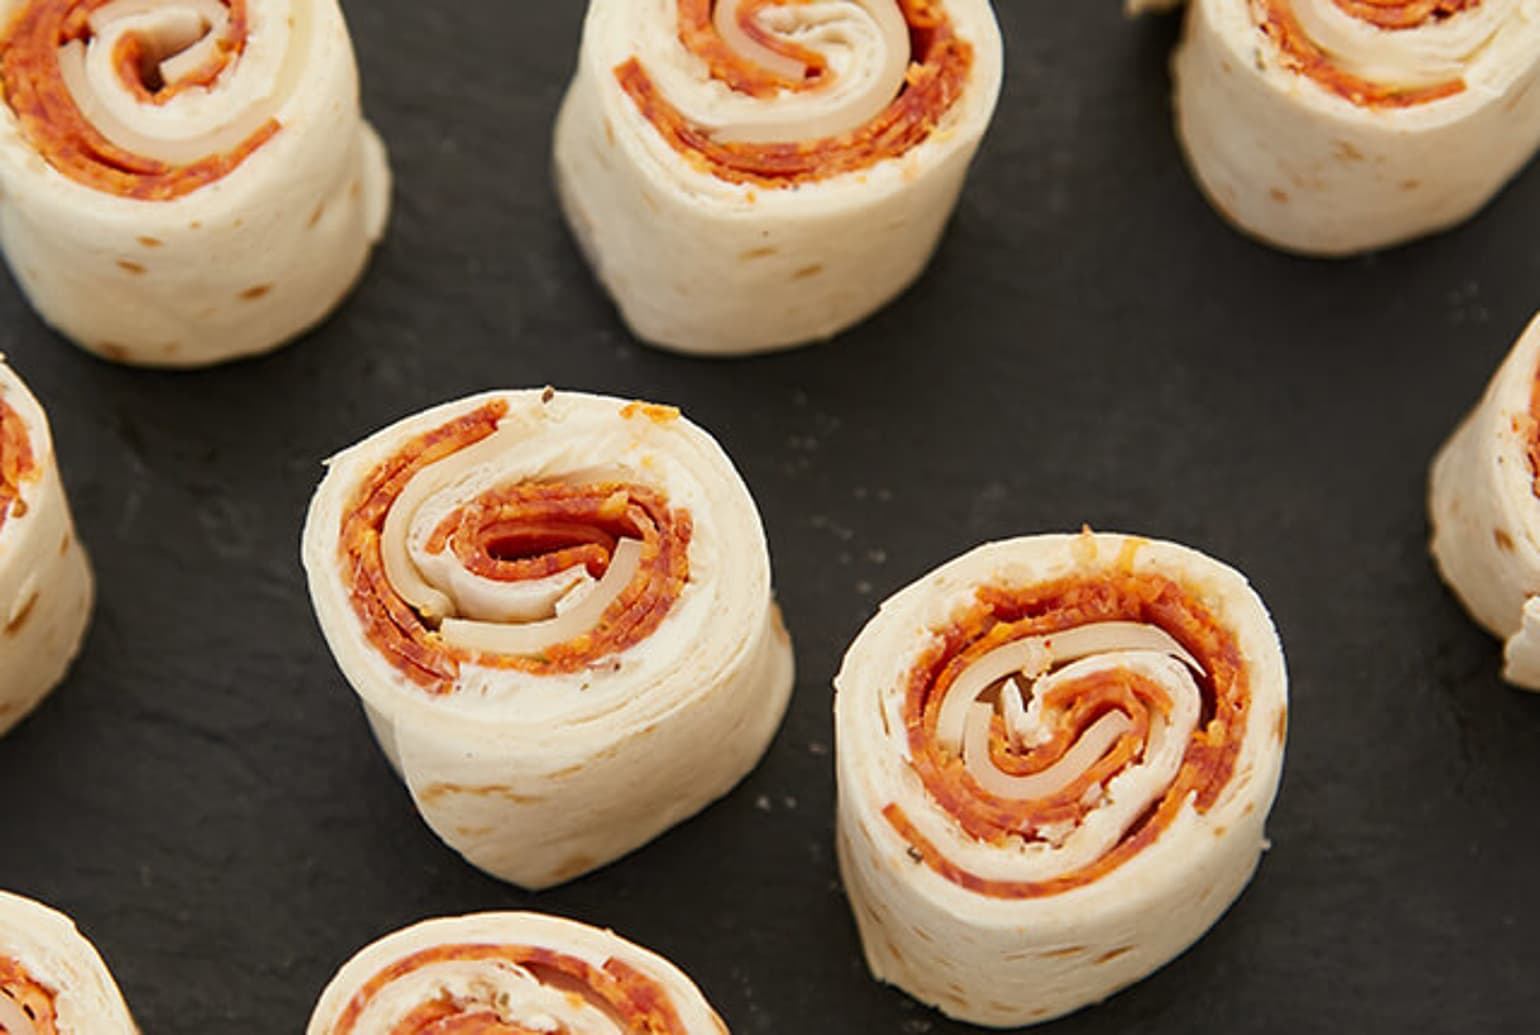 Cold Pepperoni Pizza Roll-Ups